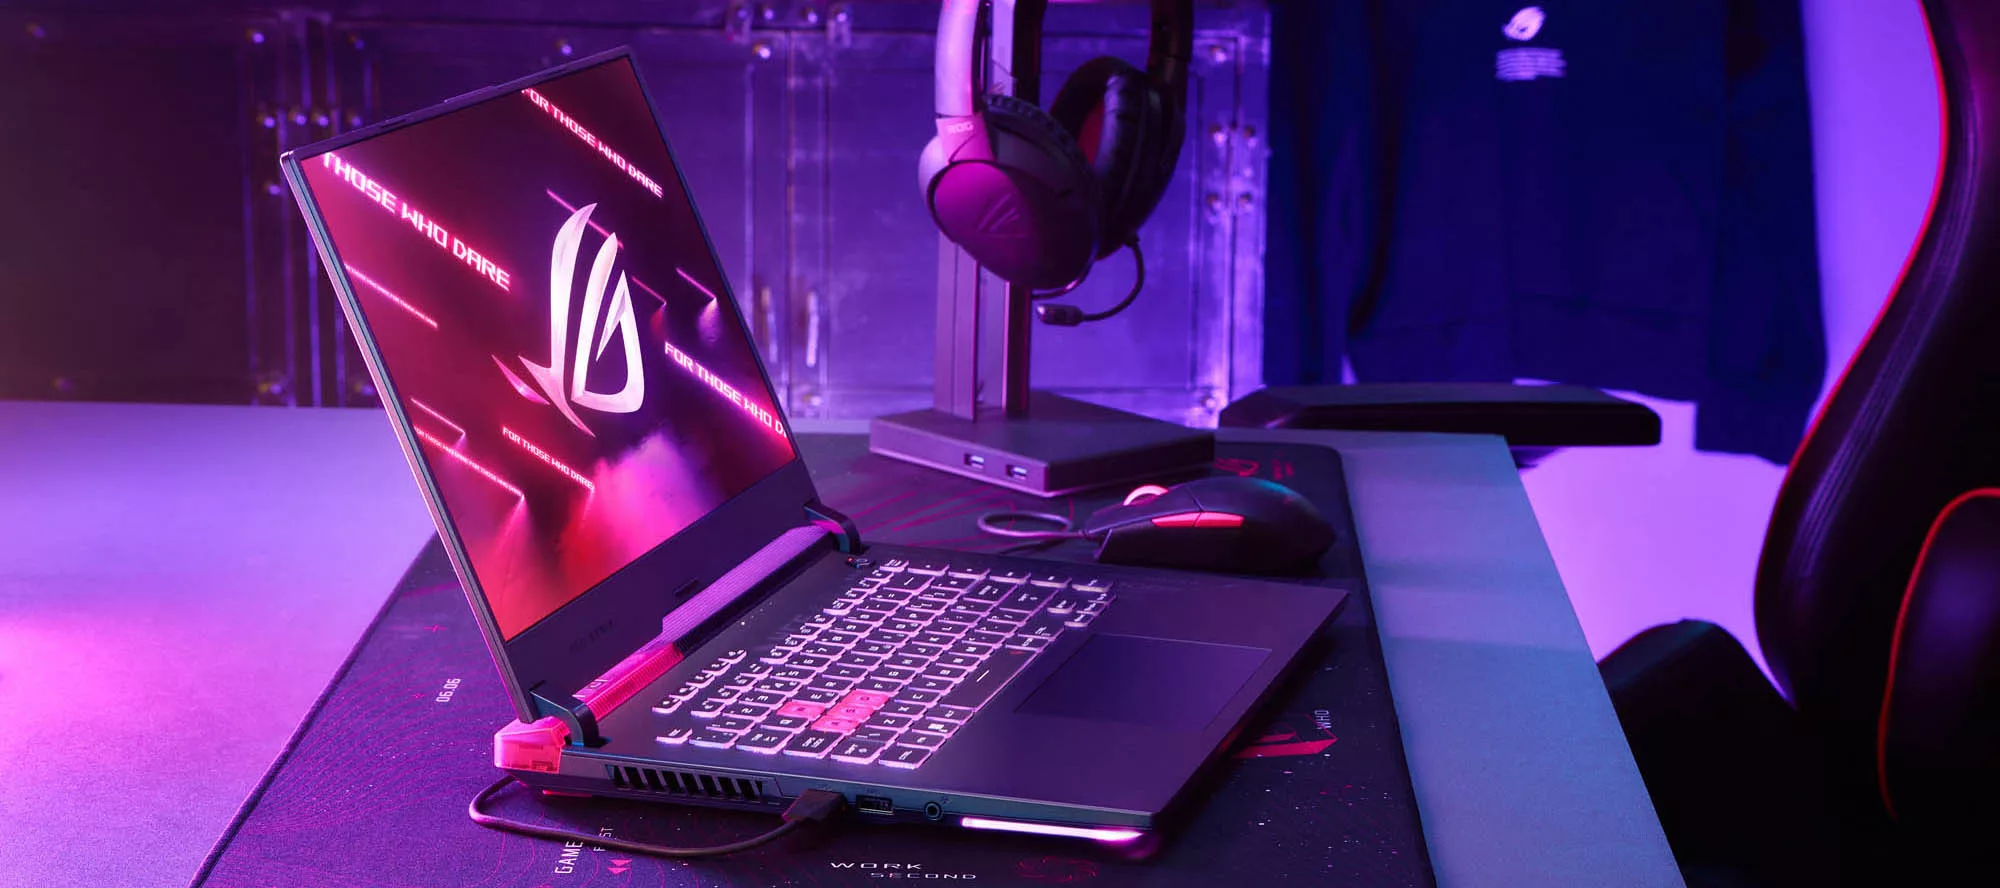 An ROG Strix G15 laptop sitting on a desk surrounded by purple lighting.